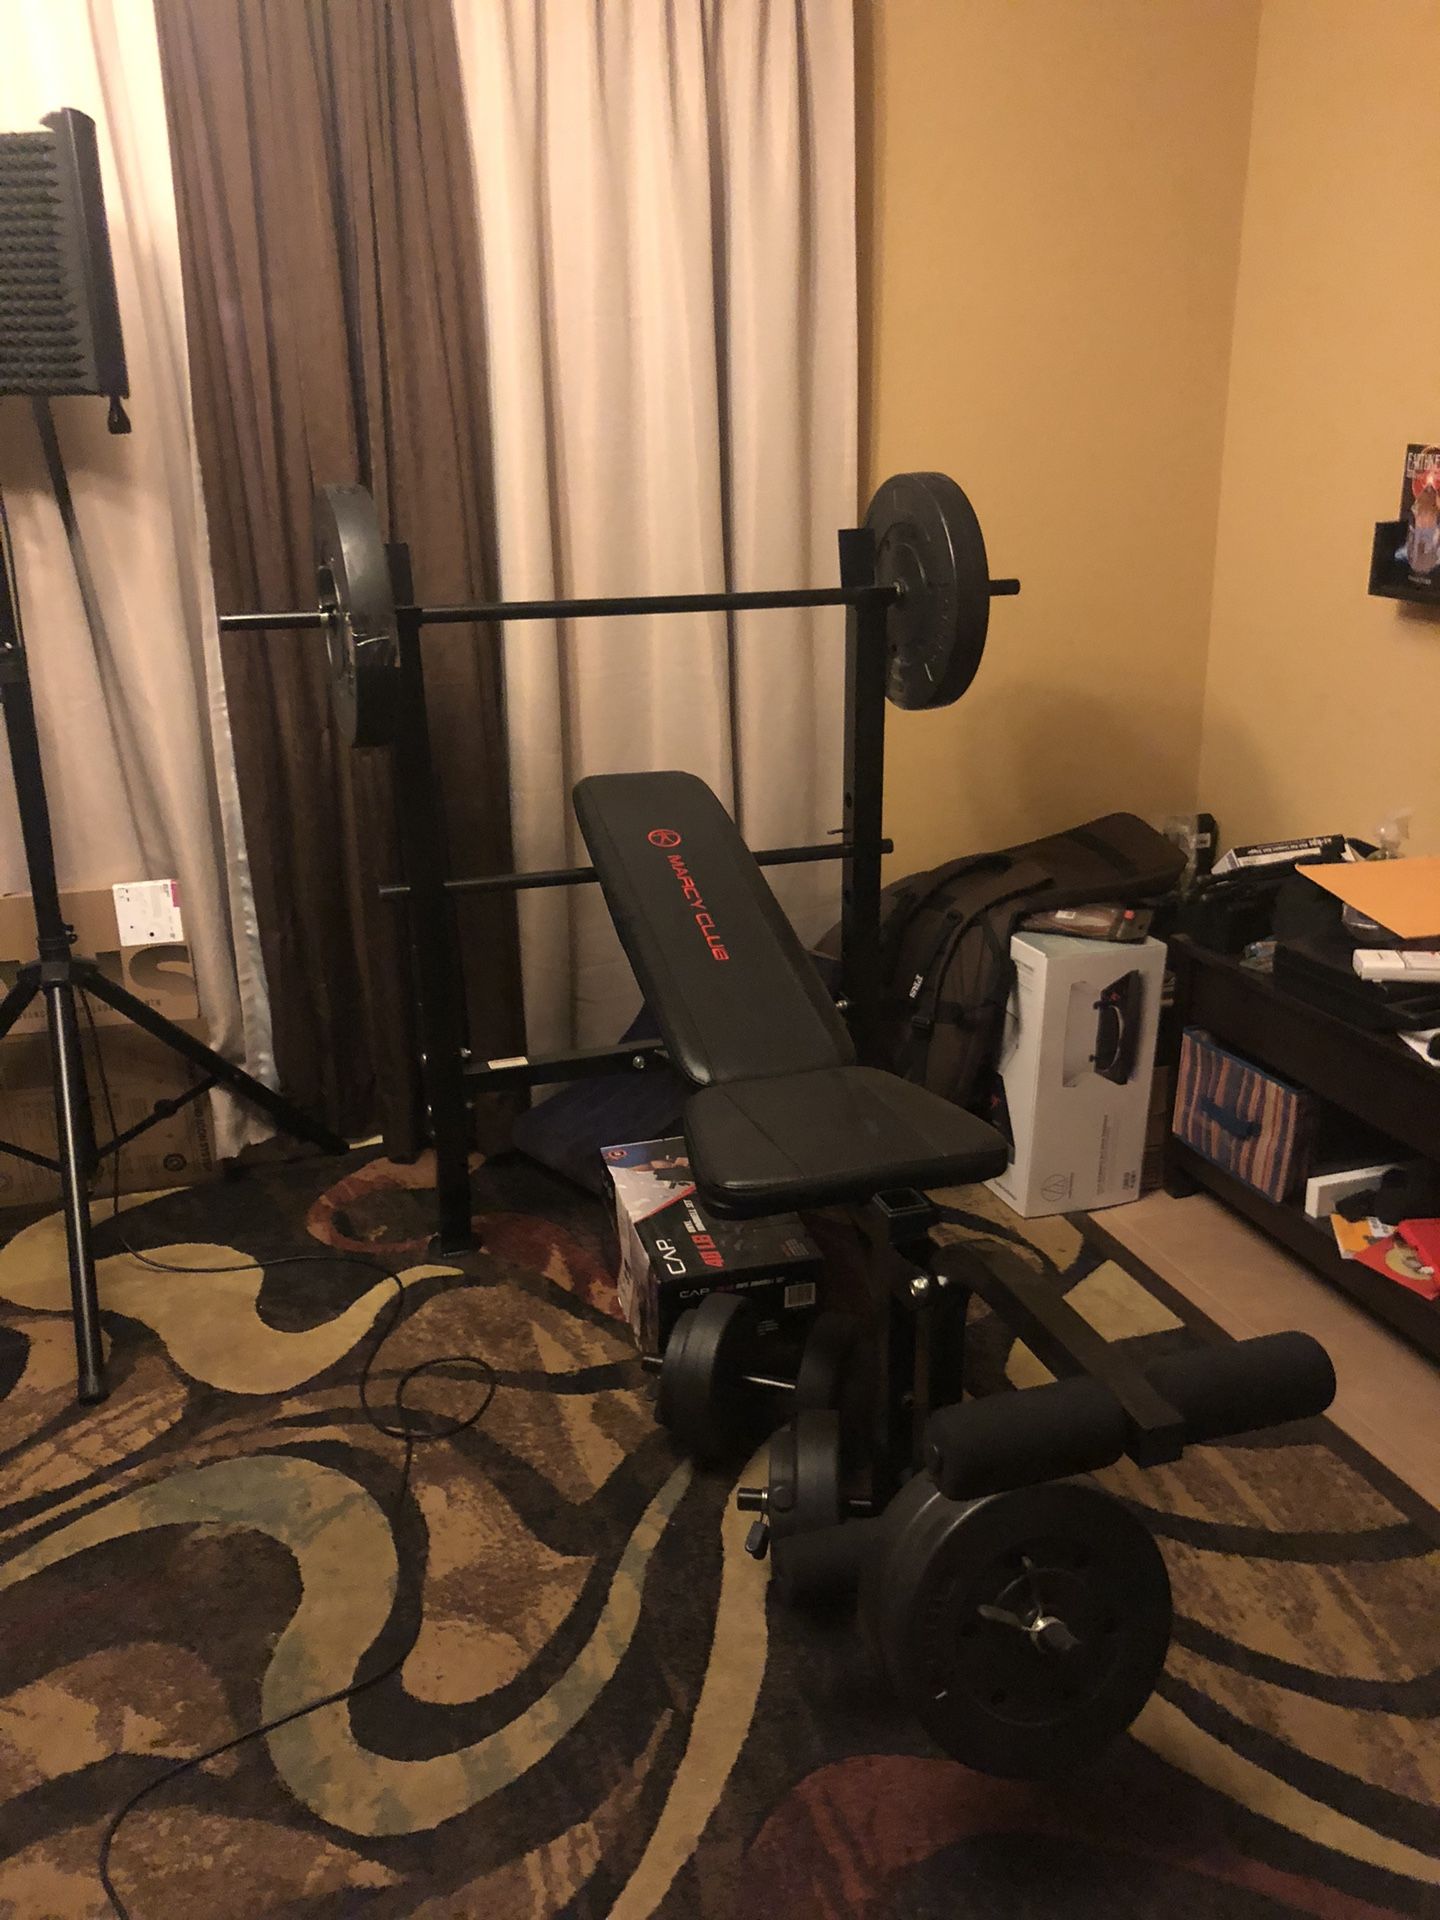 Weight Set And Bench